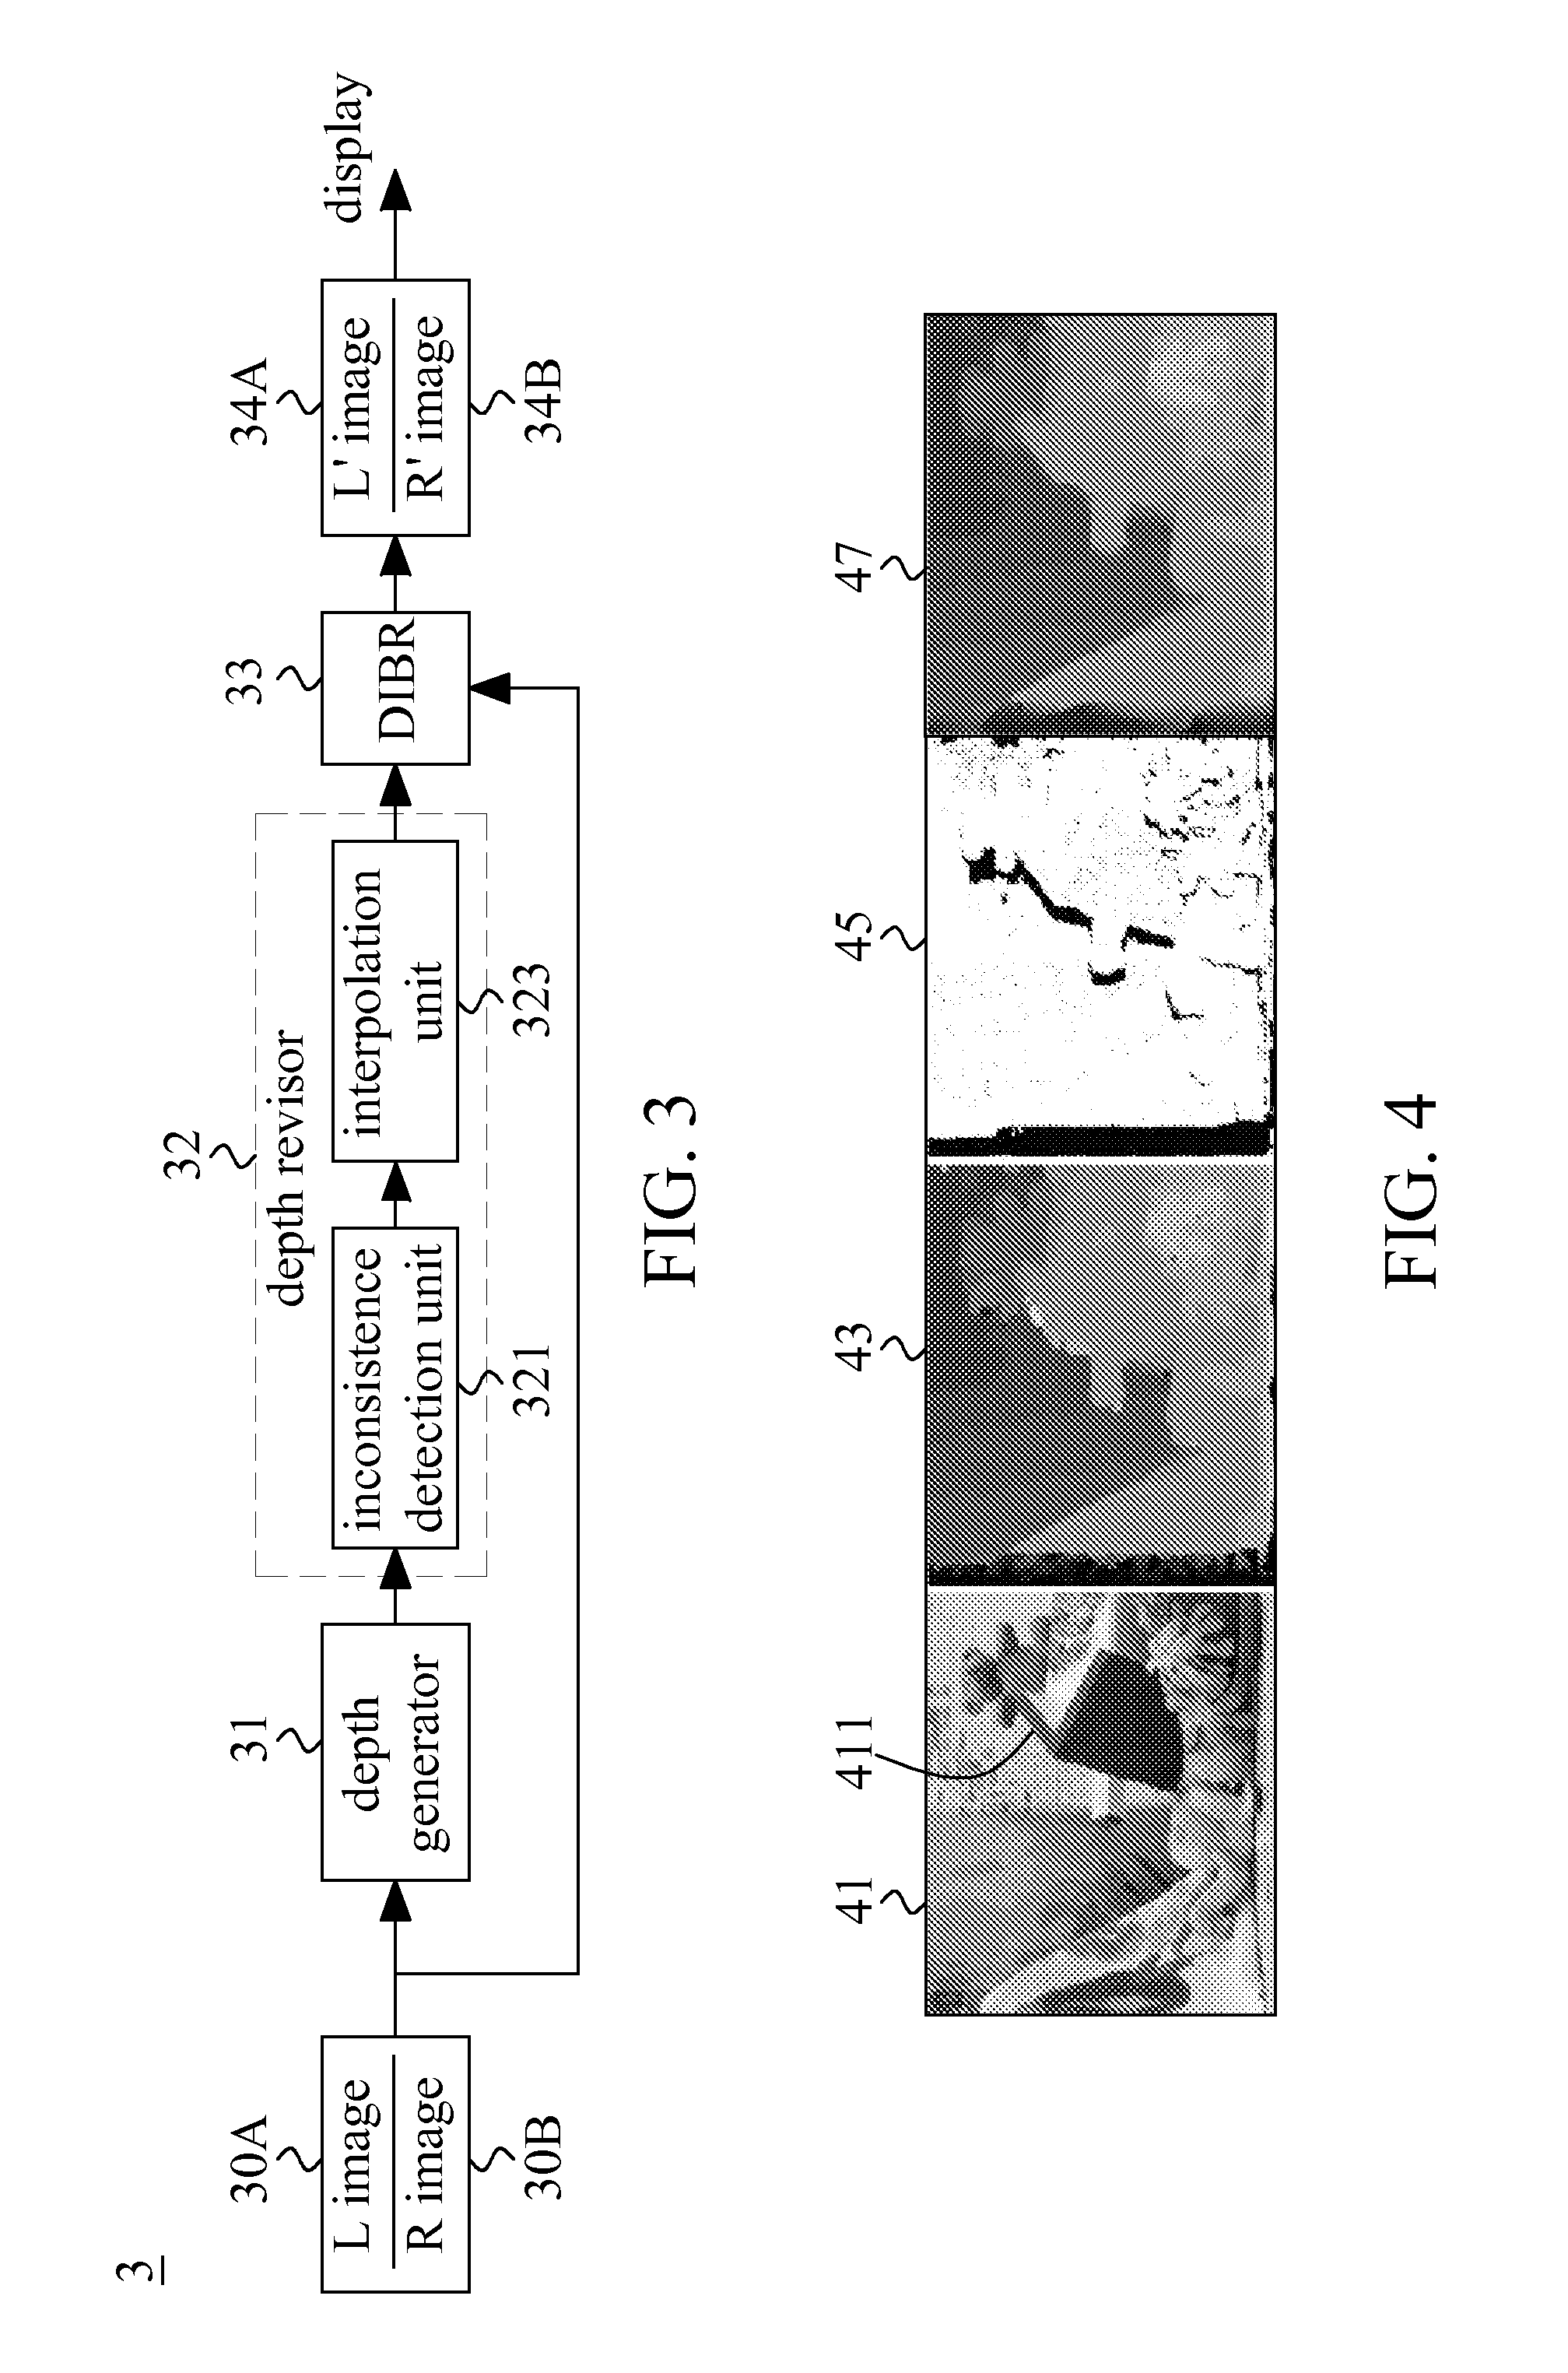 System and method of revising depth of a 3D image pair